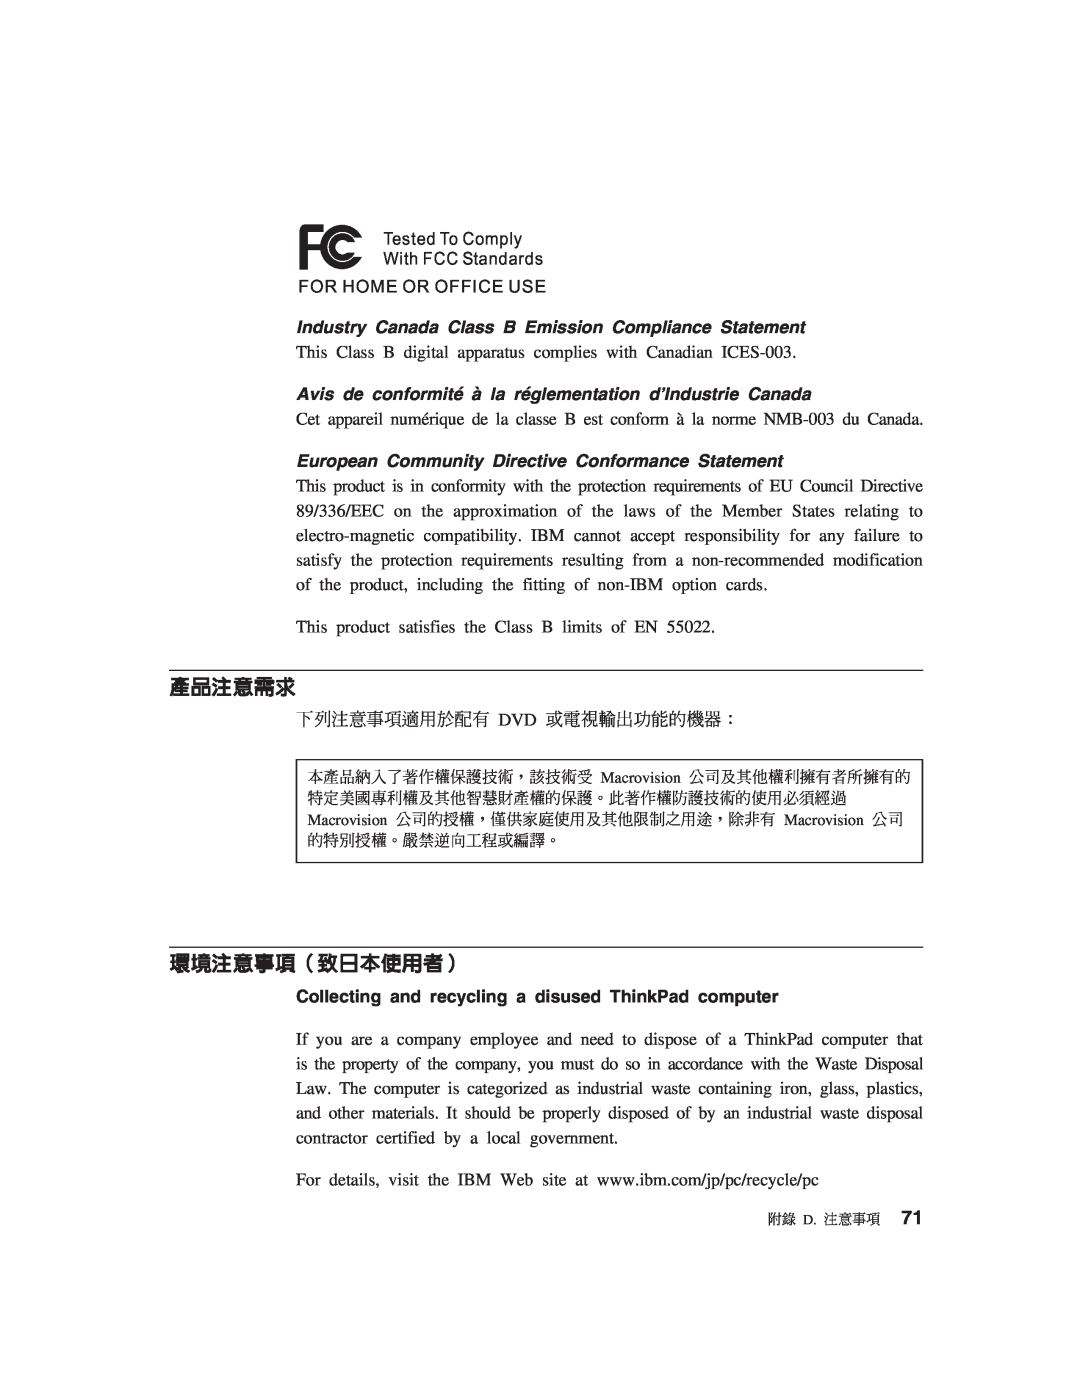 IBM R50 manual úN D, ⌠ N Pθ, Tested To Comply With FCC Standards, For Home Or Office Use, qΘX\α ≈ G 